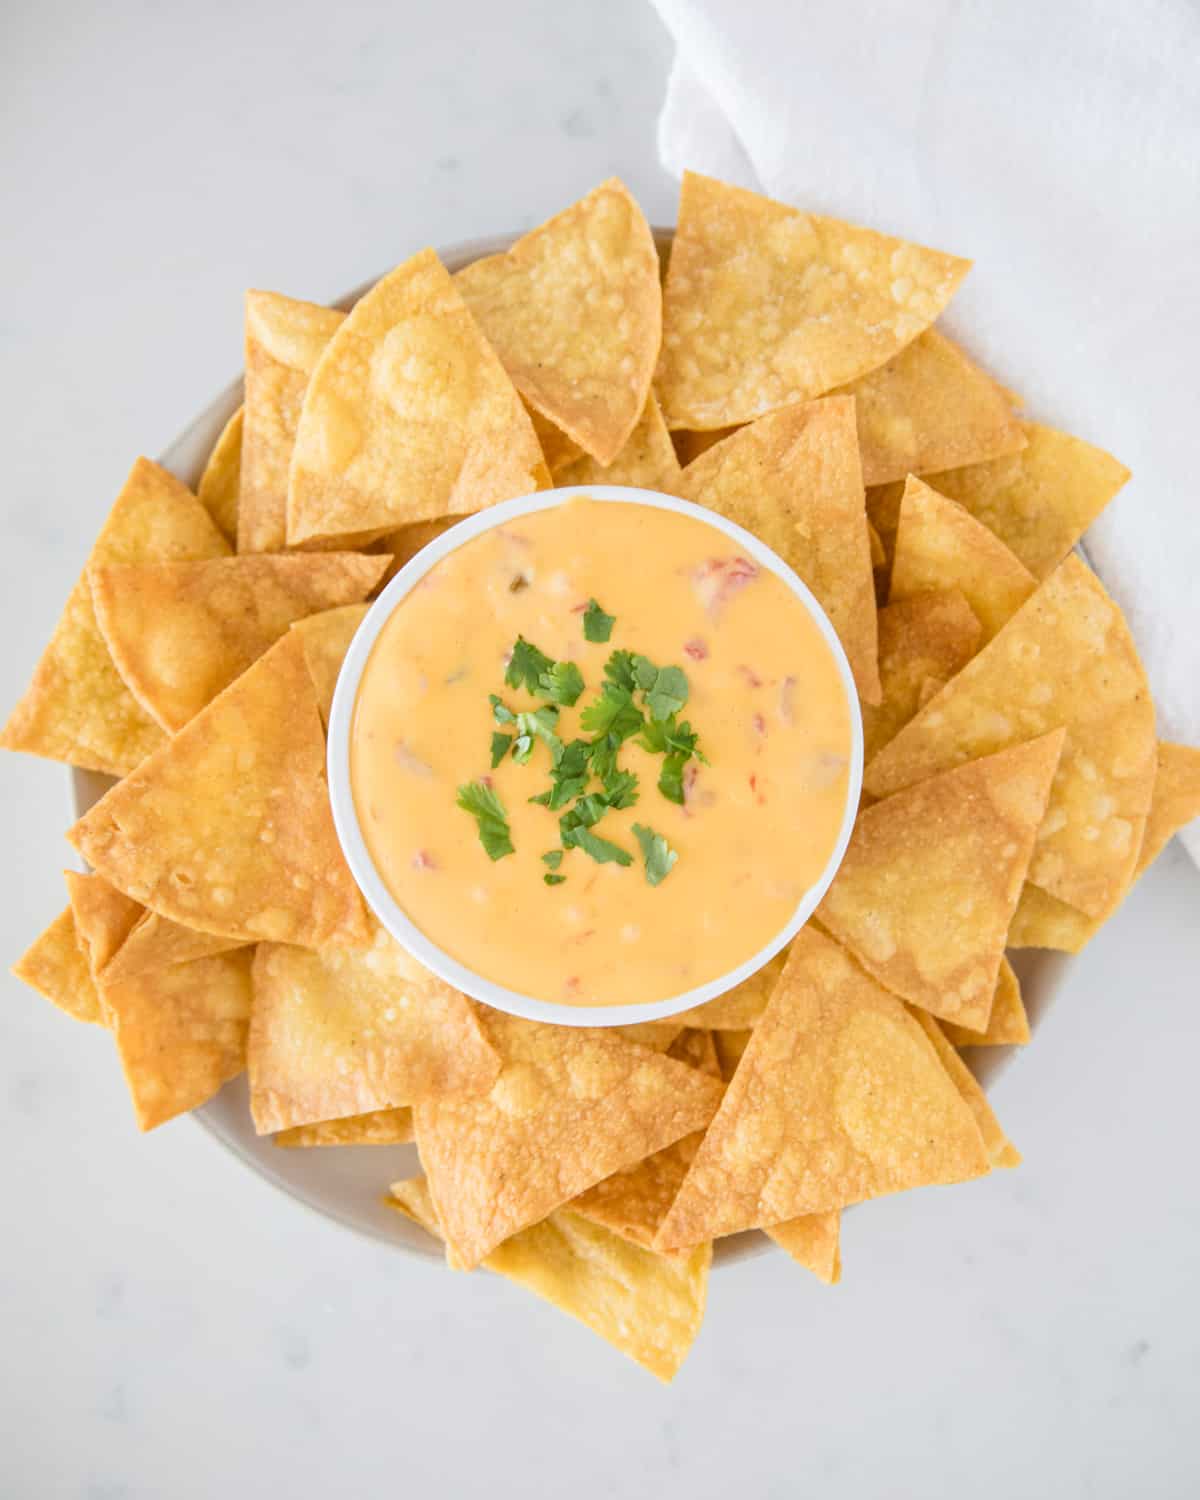 Velveeta queso dip in white bowl with tortilla chips.